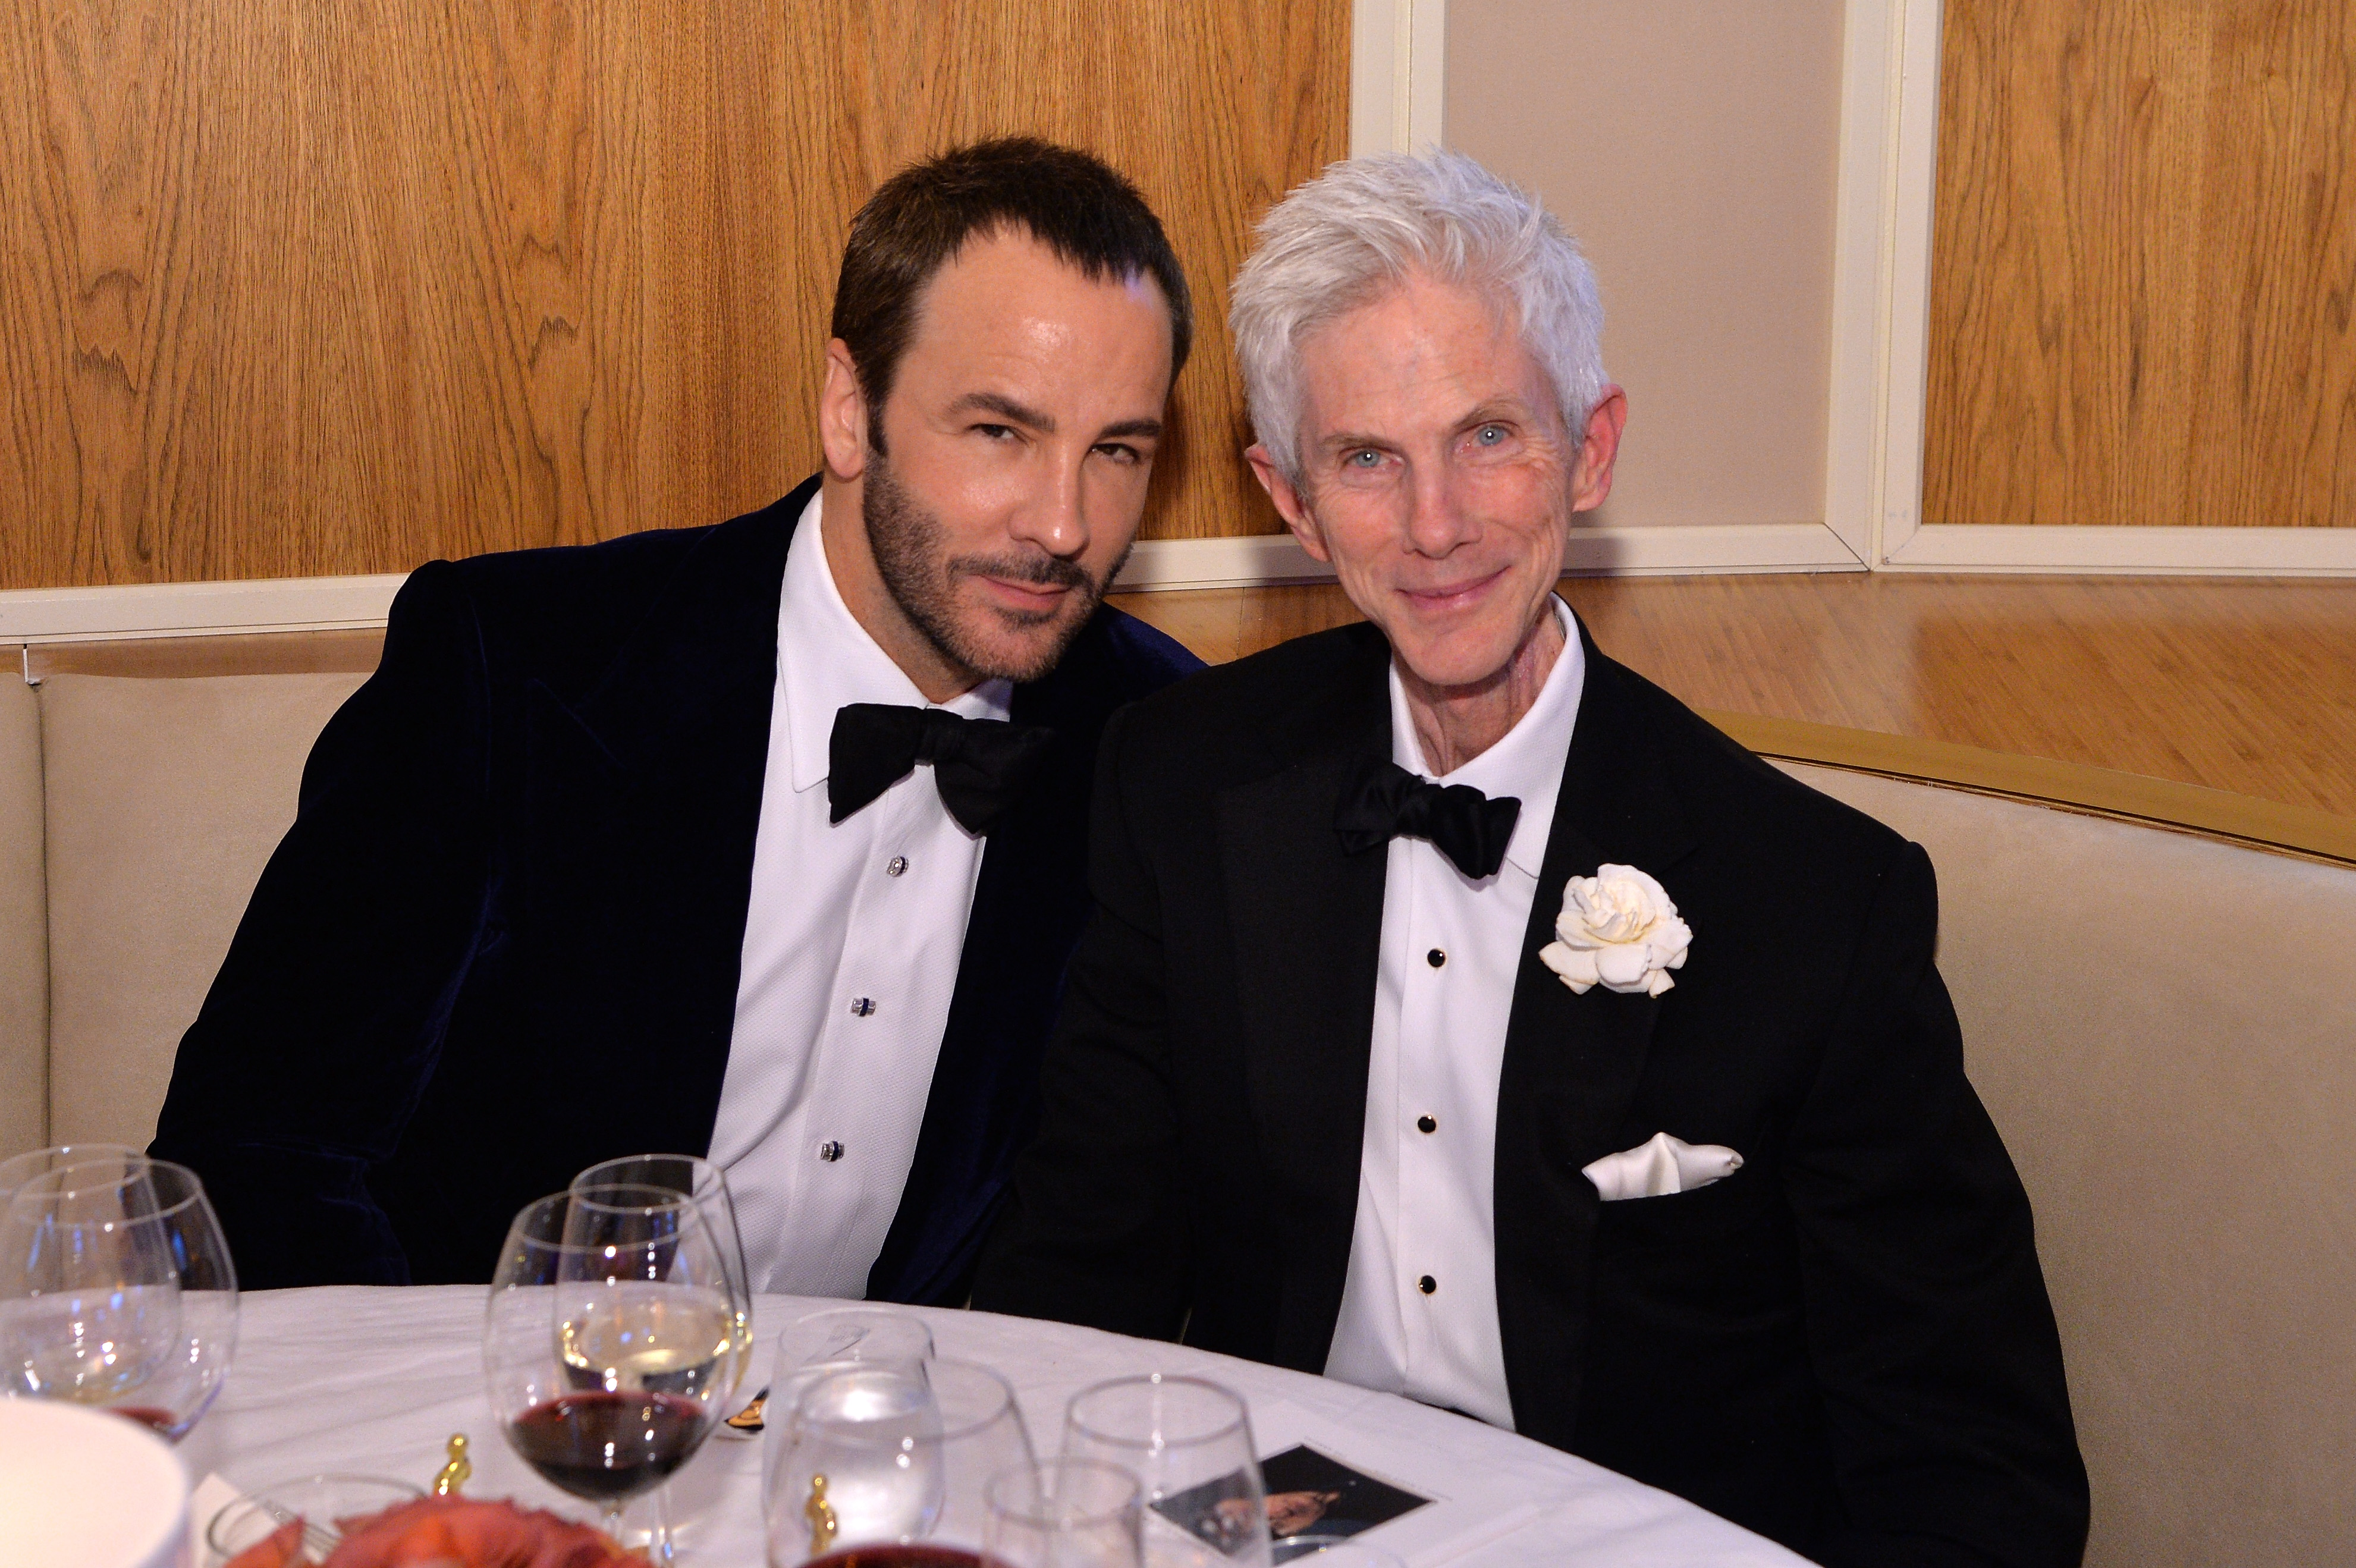 Inside Tom Ford and Richard Buckley's Relationship